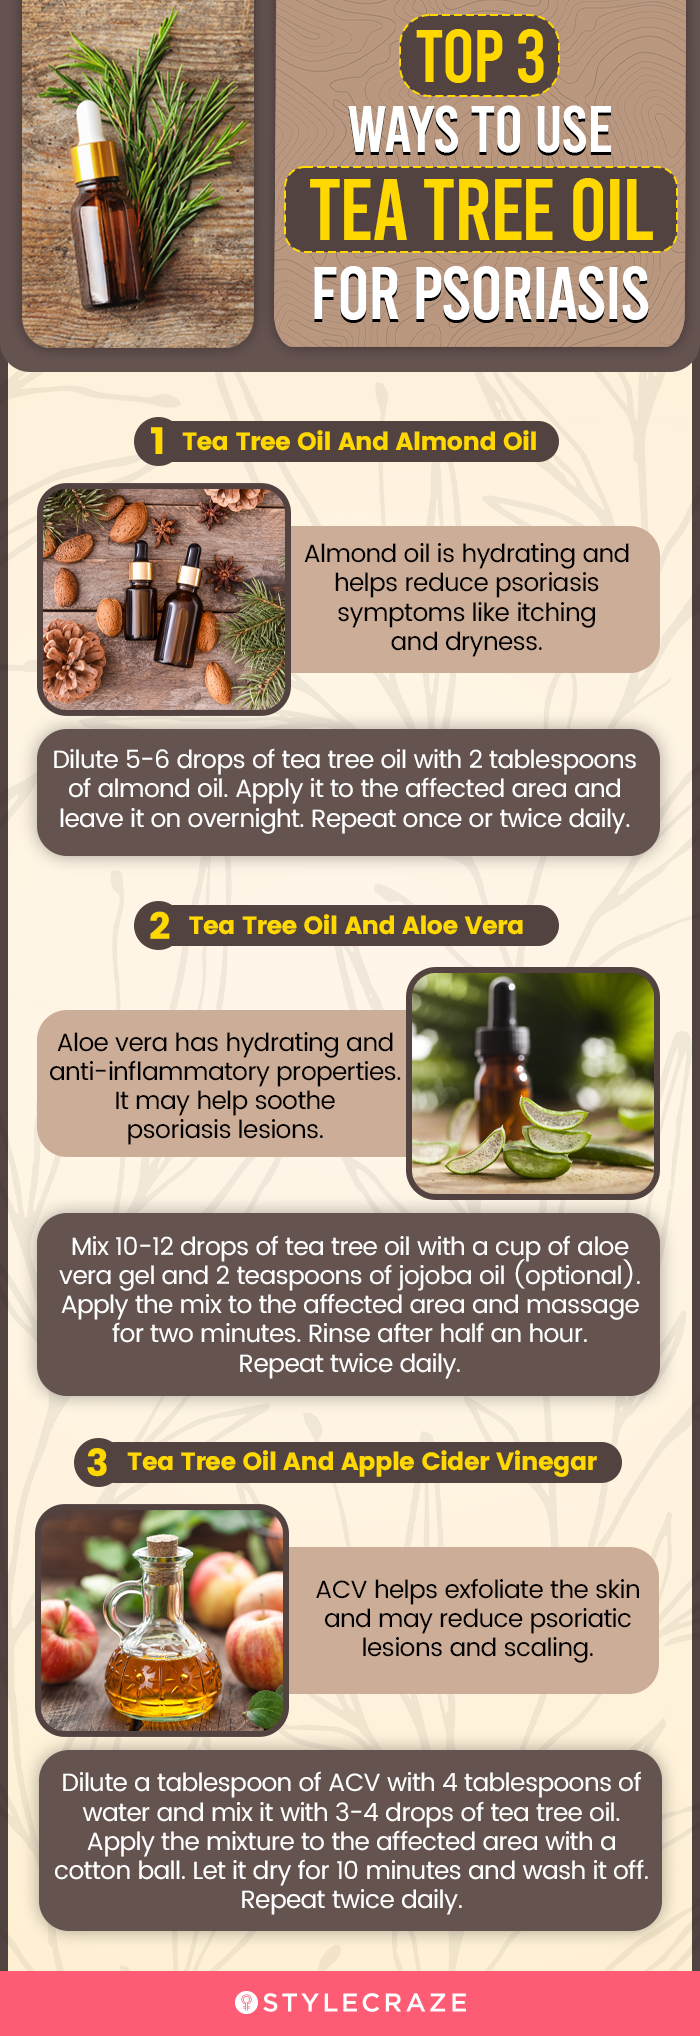 top 3 ways to use tea tree oil for psoriasis (infographic)